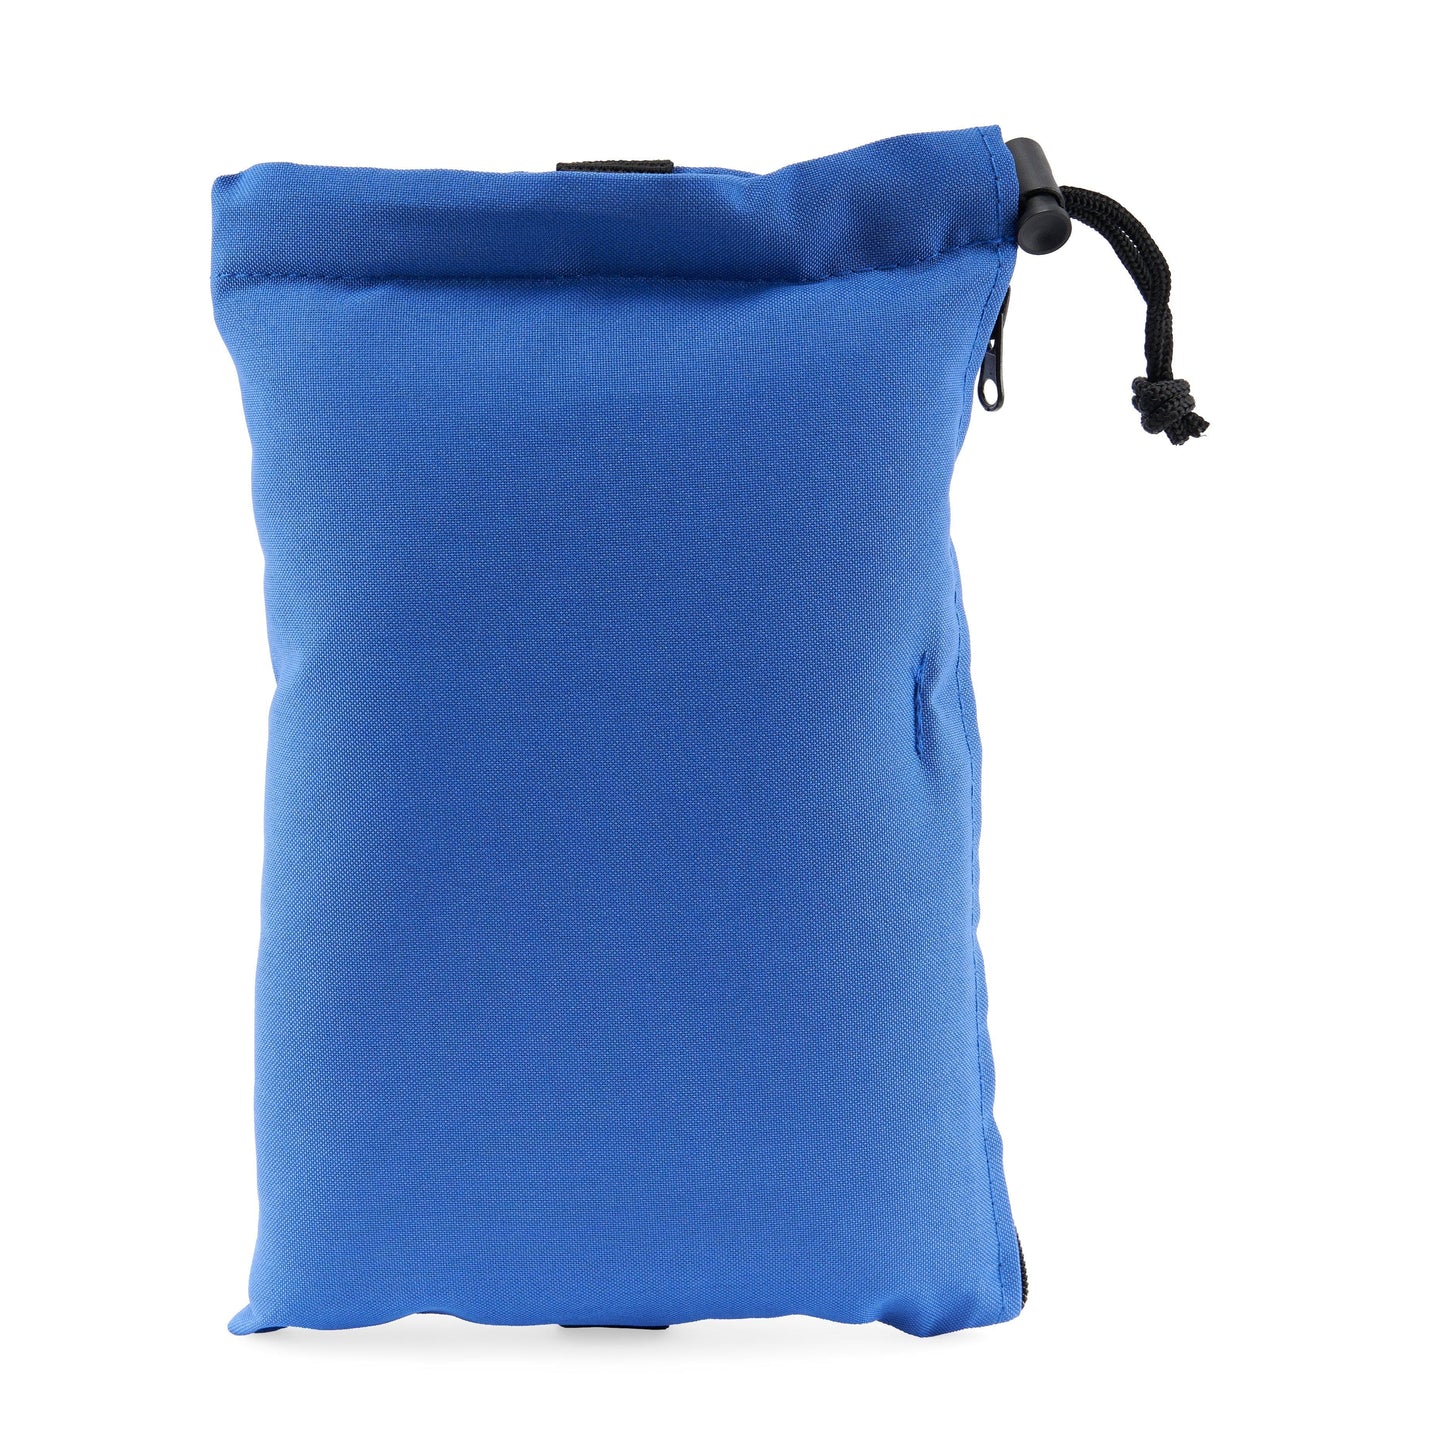 Glass Pillow Travel Bag Blue 11" Storage Pouch with Zipper and Drawstring